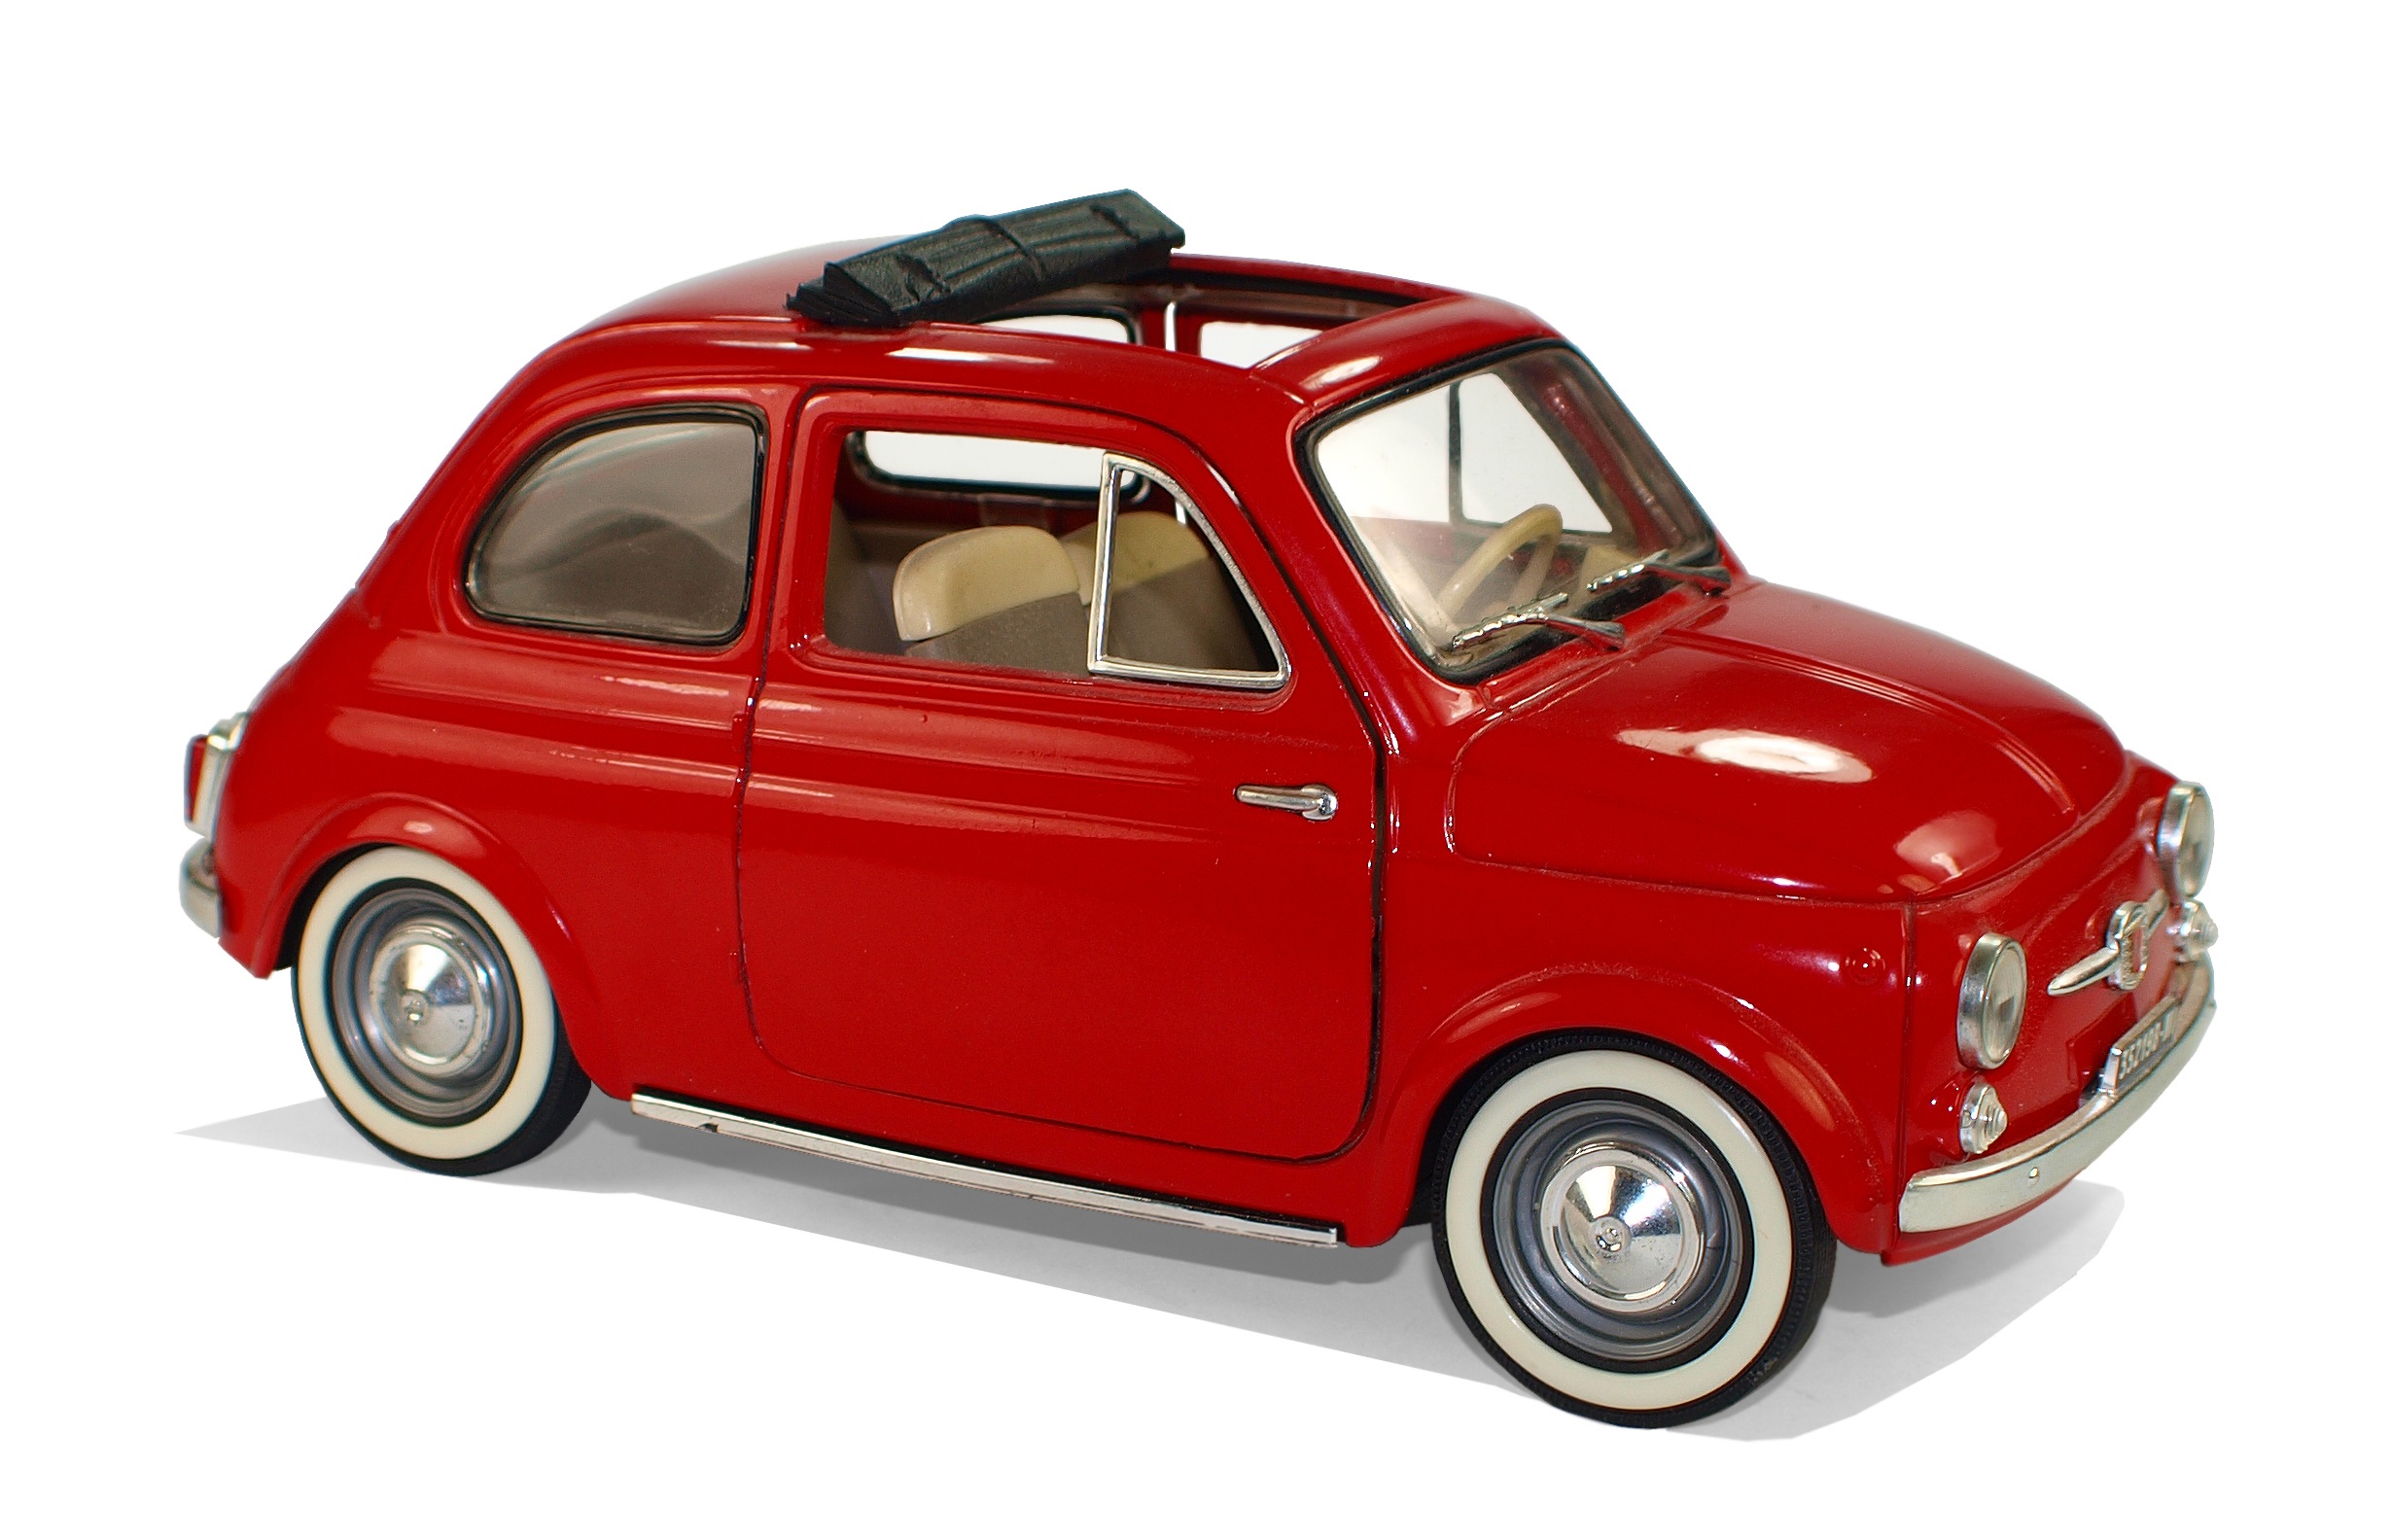 Free photo Toy model of a Fiat 500 car in red